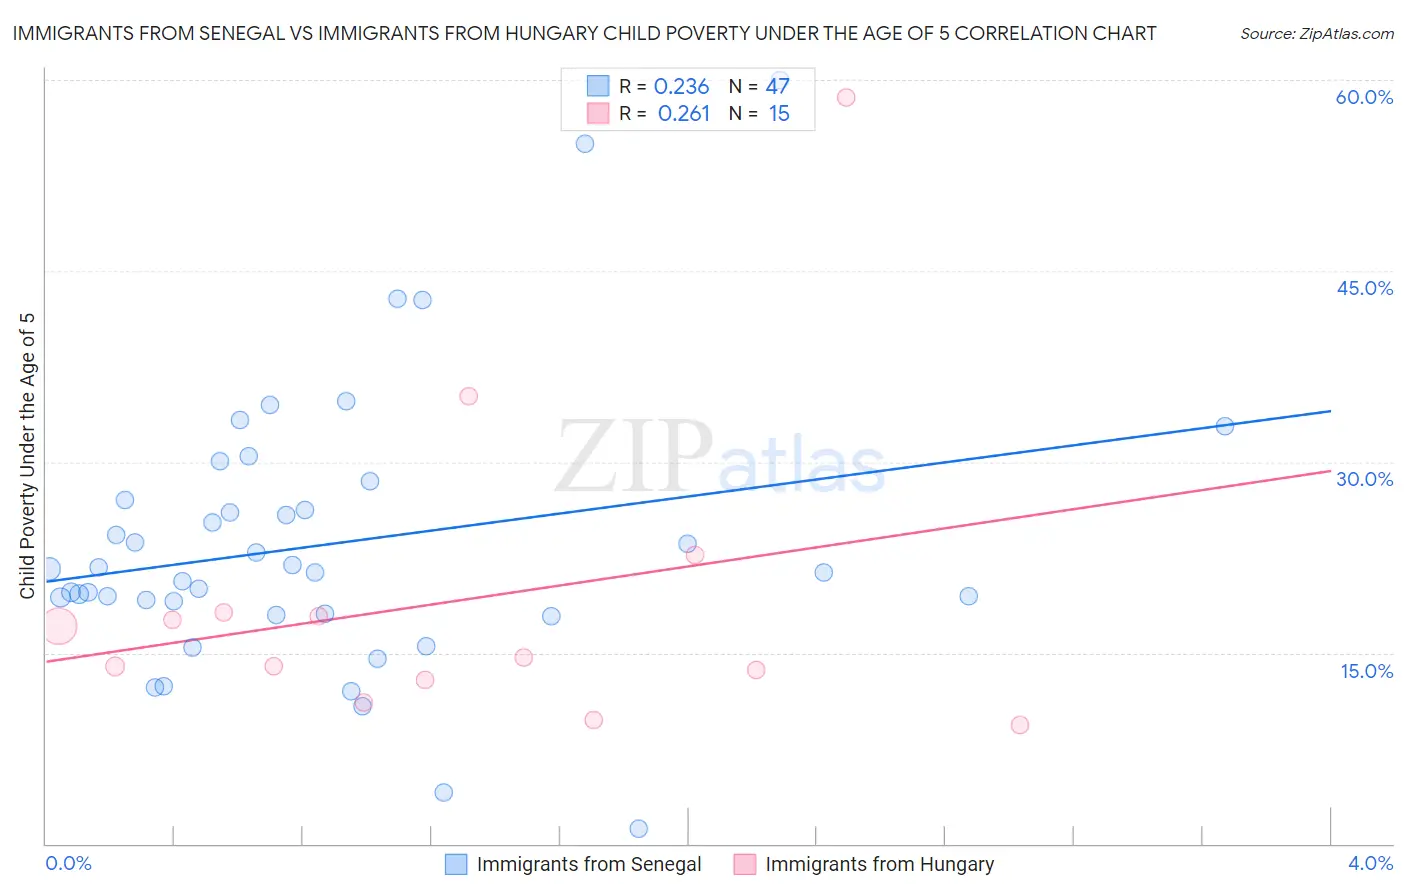 Immigrants from Senegal vs Immigrants from Hungary Child Poverty Under the Age of 5